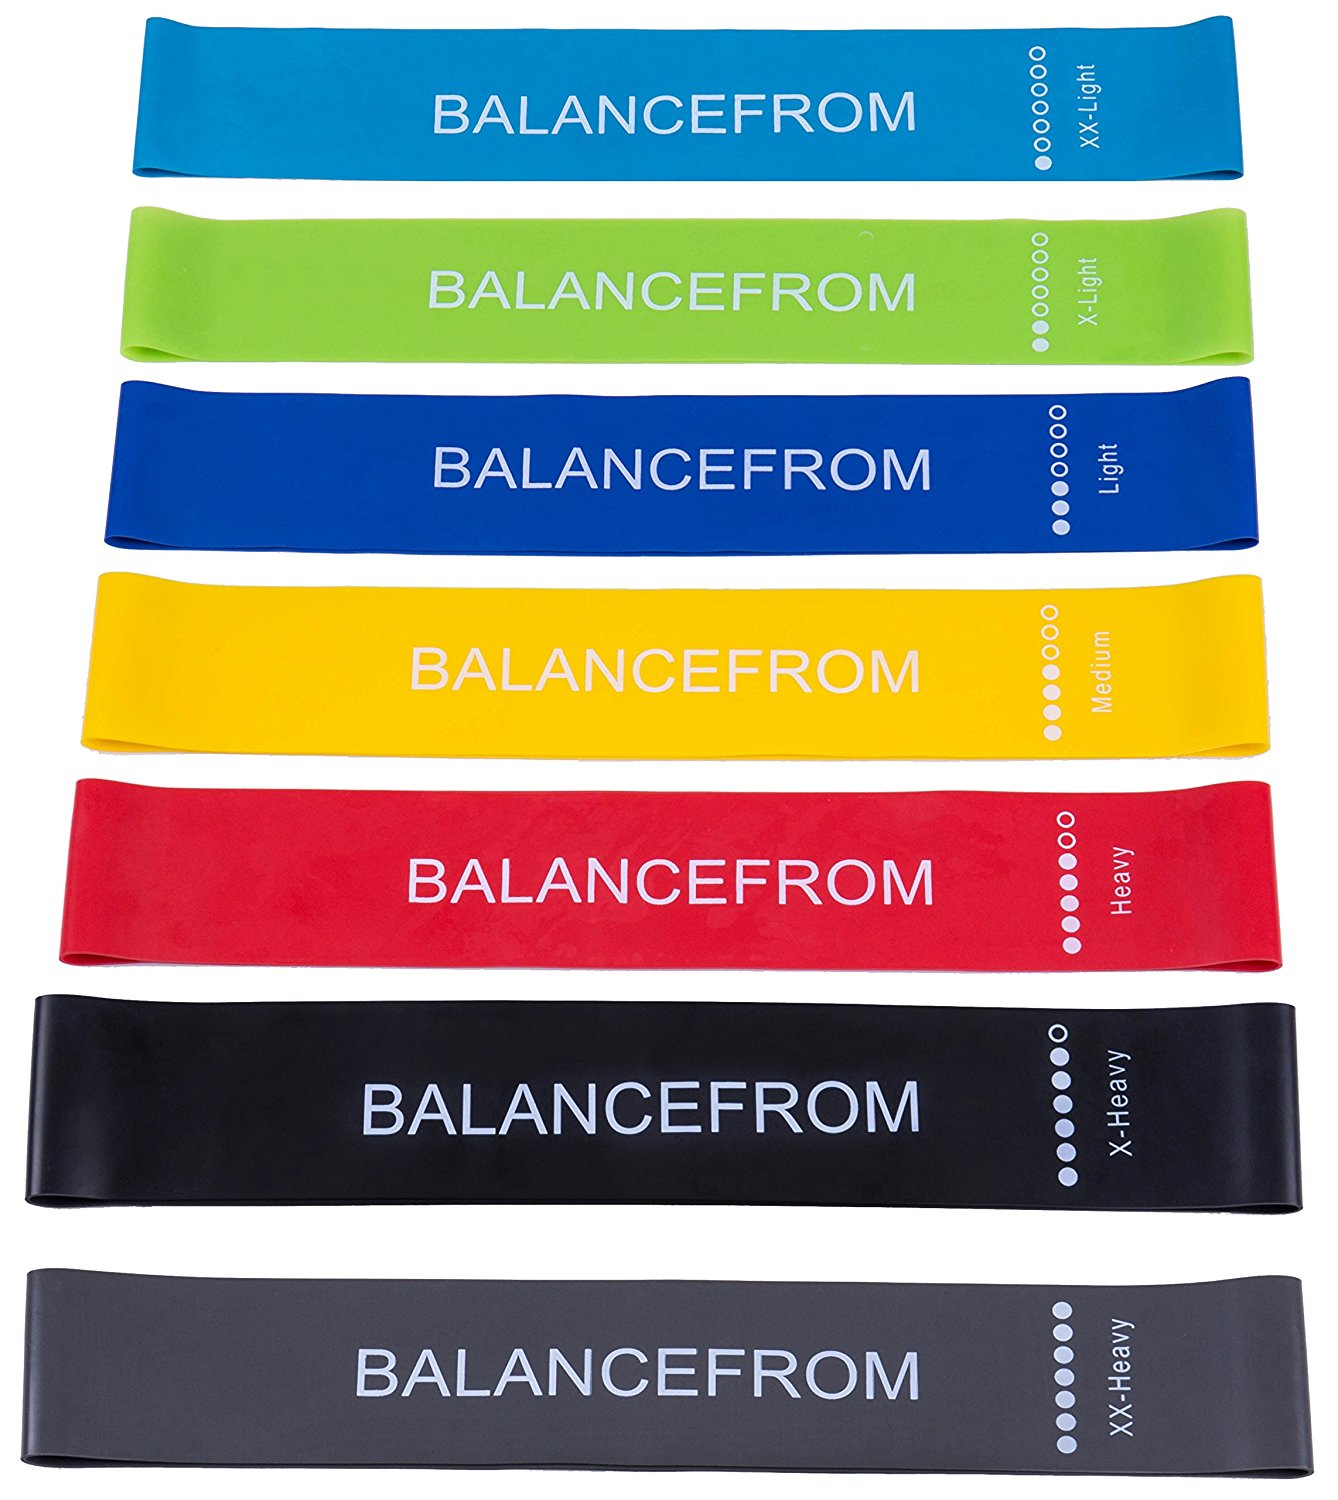 BalanceFrom Resistance Loop Exercise Bands with Exercise Cards and Carrying Bag, Set of 7 - image 2 of 5